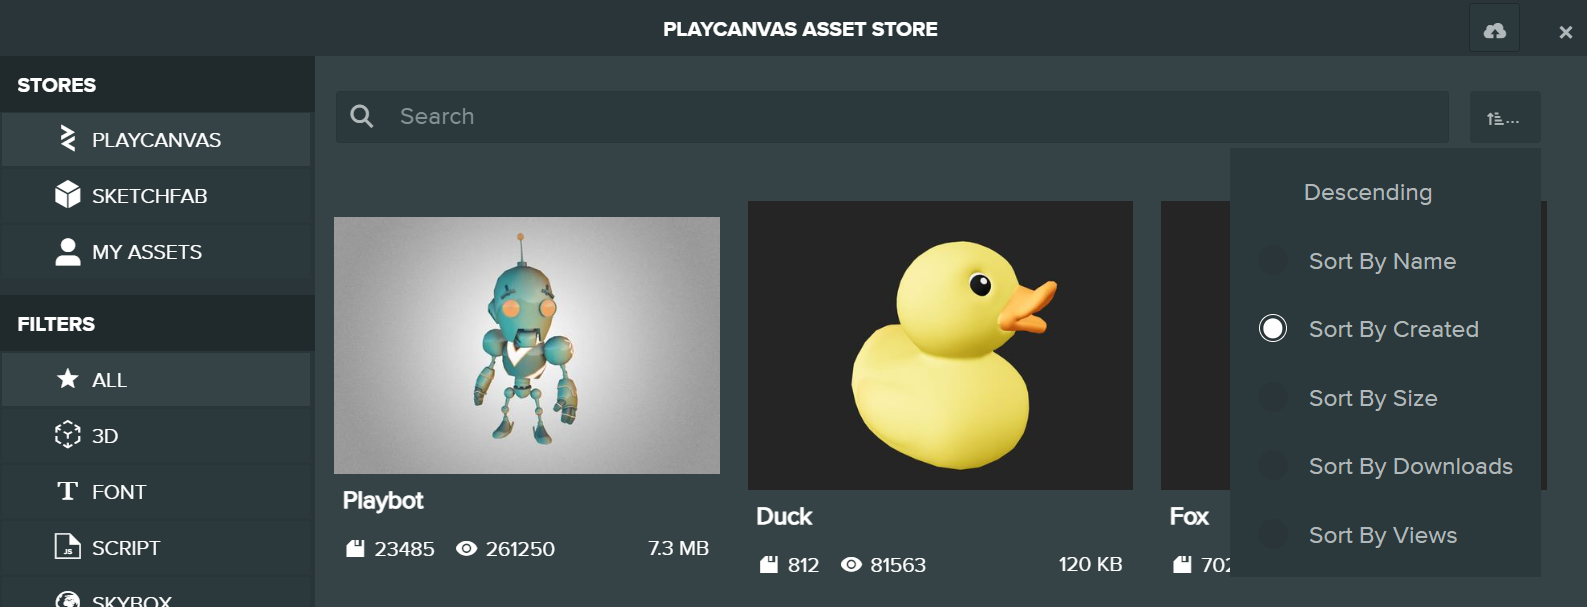 Asset Store Search